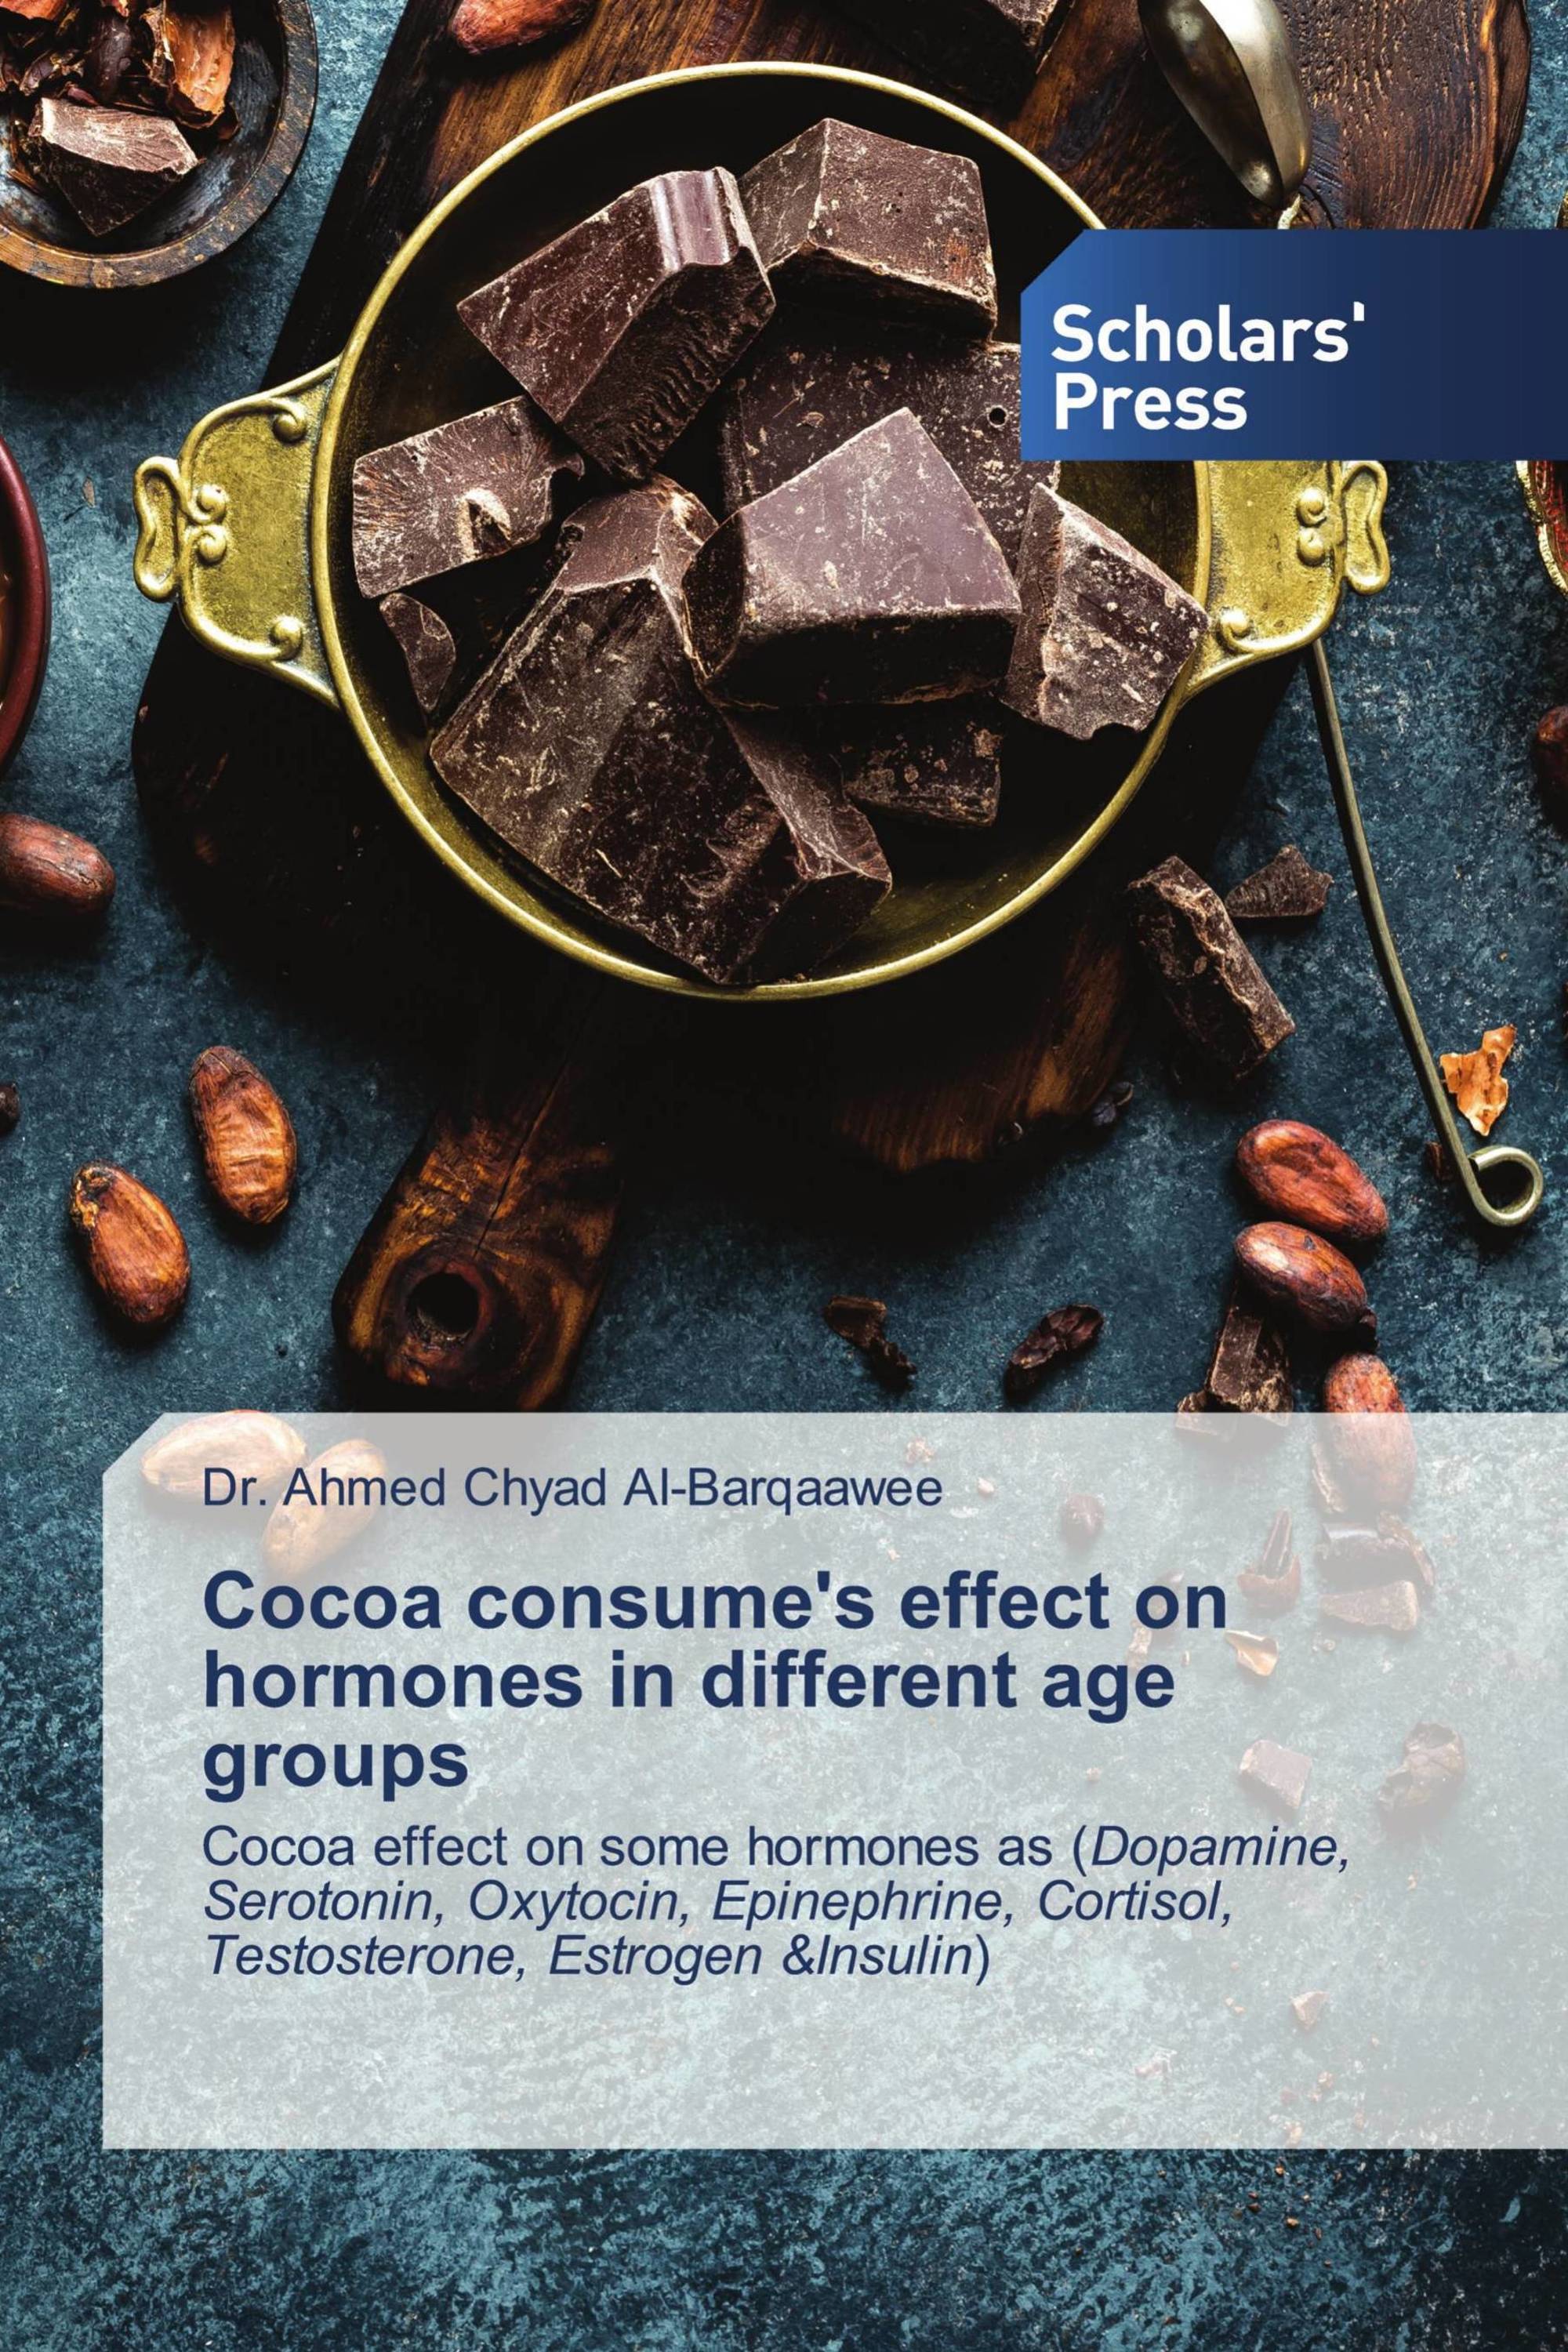 Cocoa consume's effect on hormones in different age groups